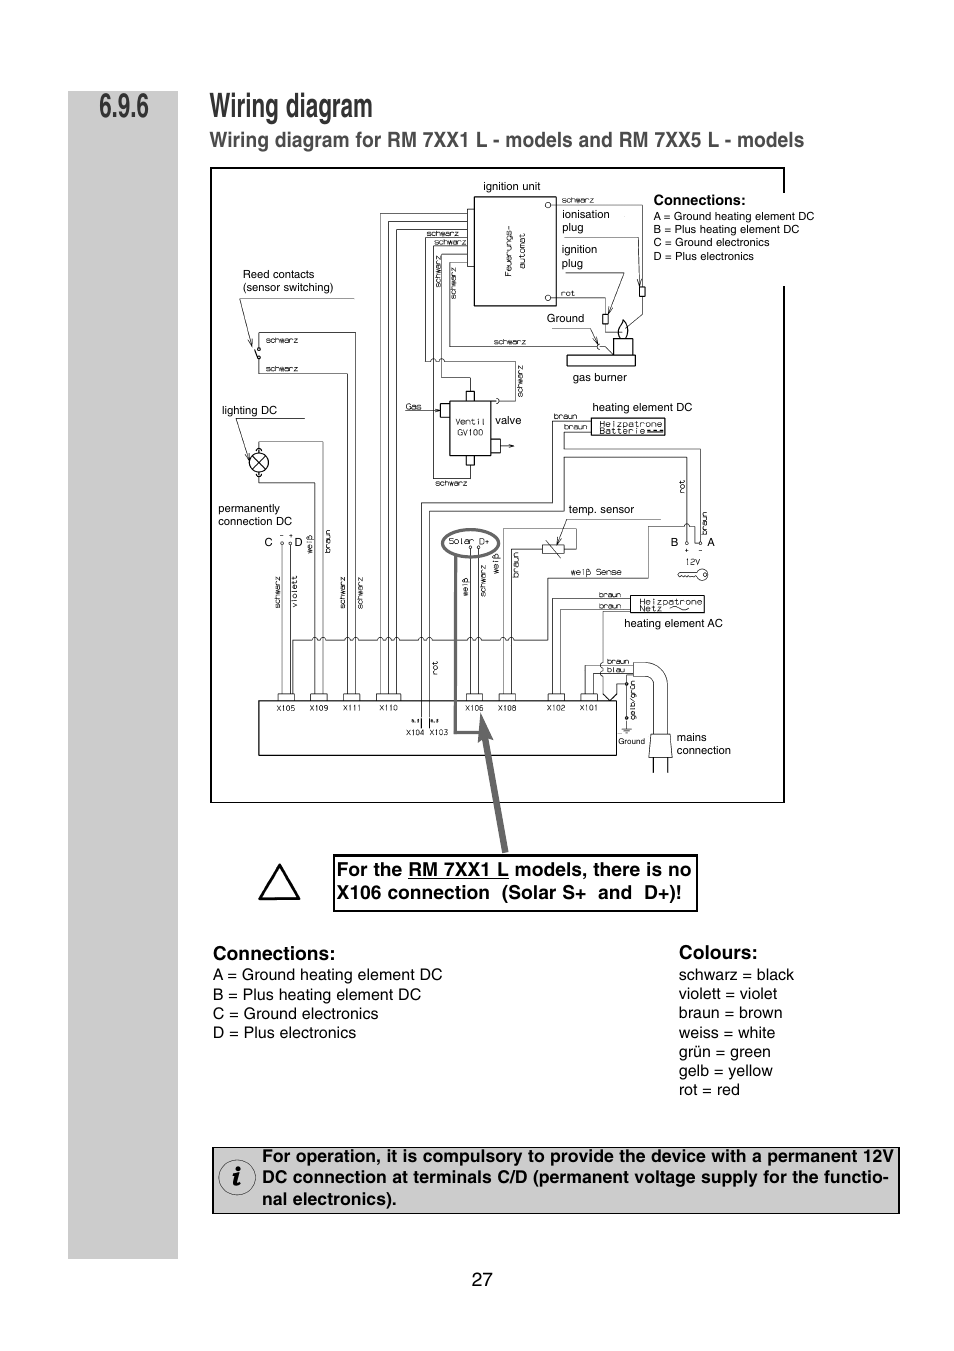 Wiring diagram, Connections, Colours | Dometic RM 7361 L User Manual